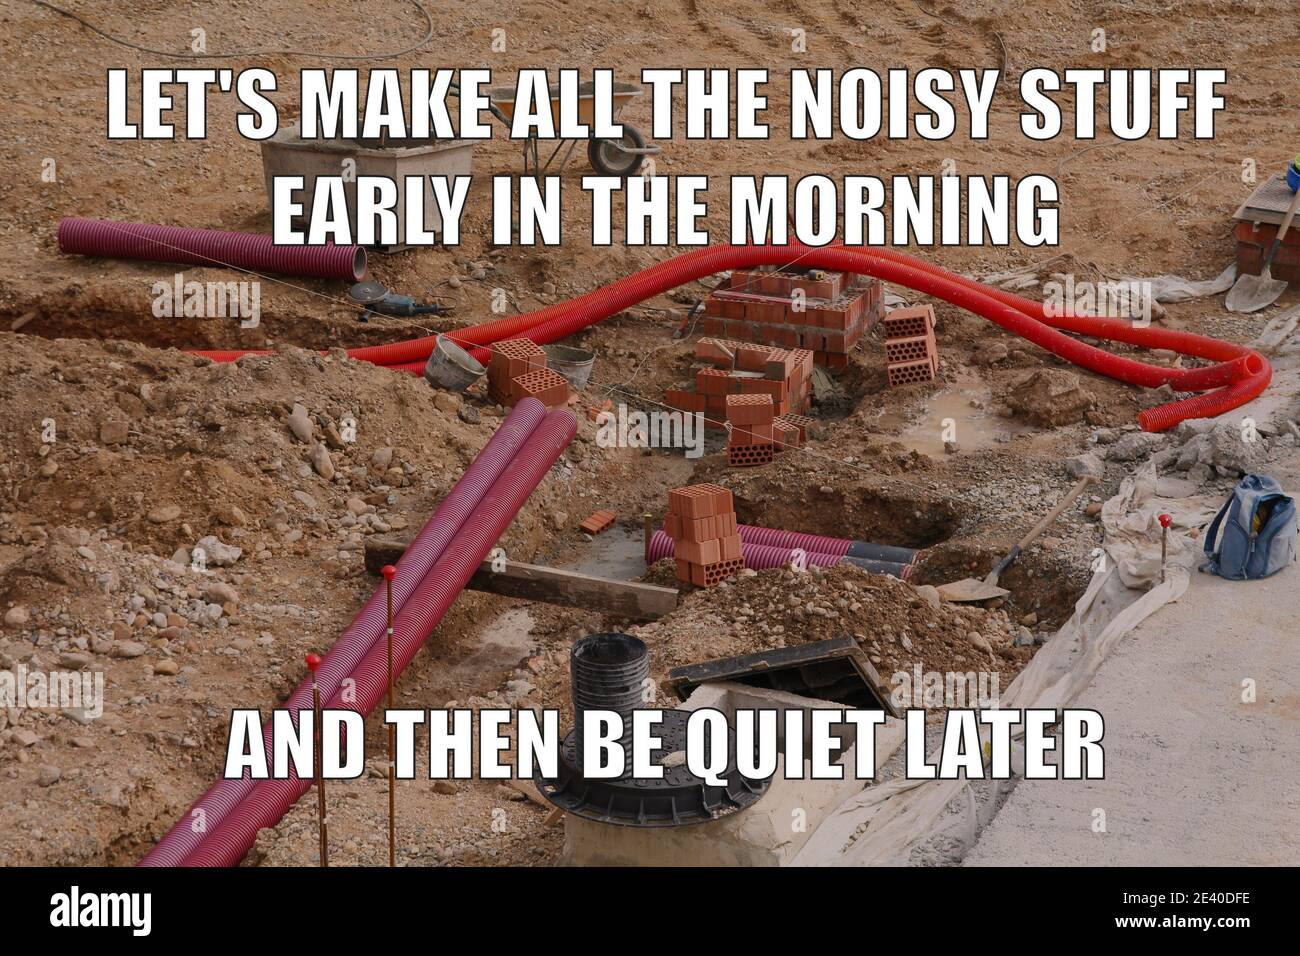 Construction workers morning noise funny meme for social media sharing. Construction site problems. Stock Photo